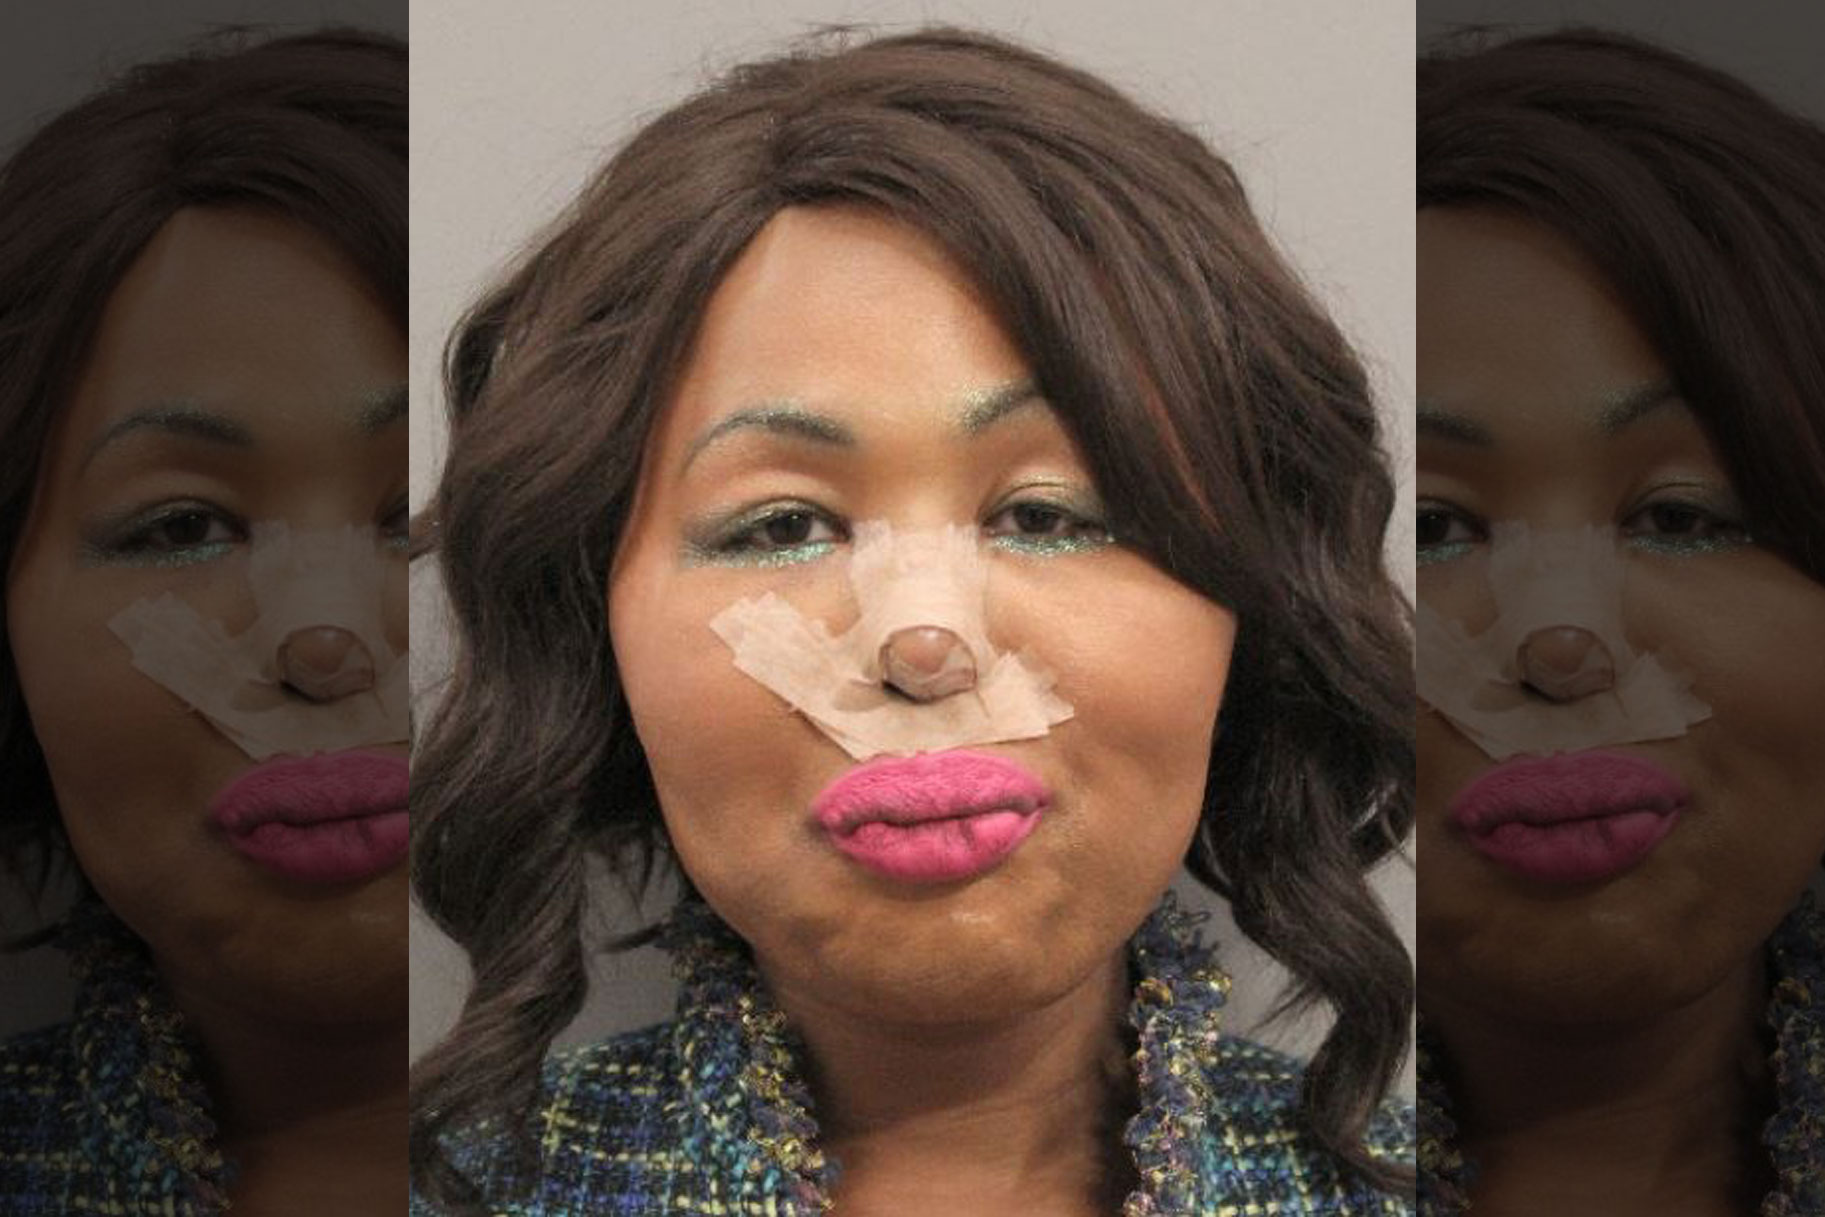 Transwoman Pleads Guilty to Robbing Bank for Plastic Surgery Money